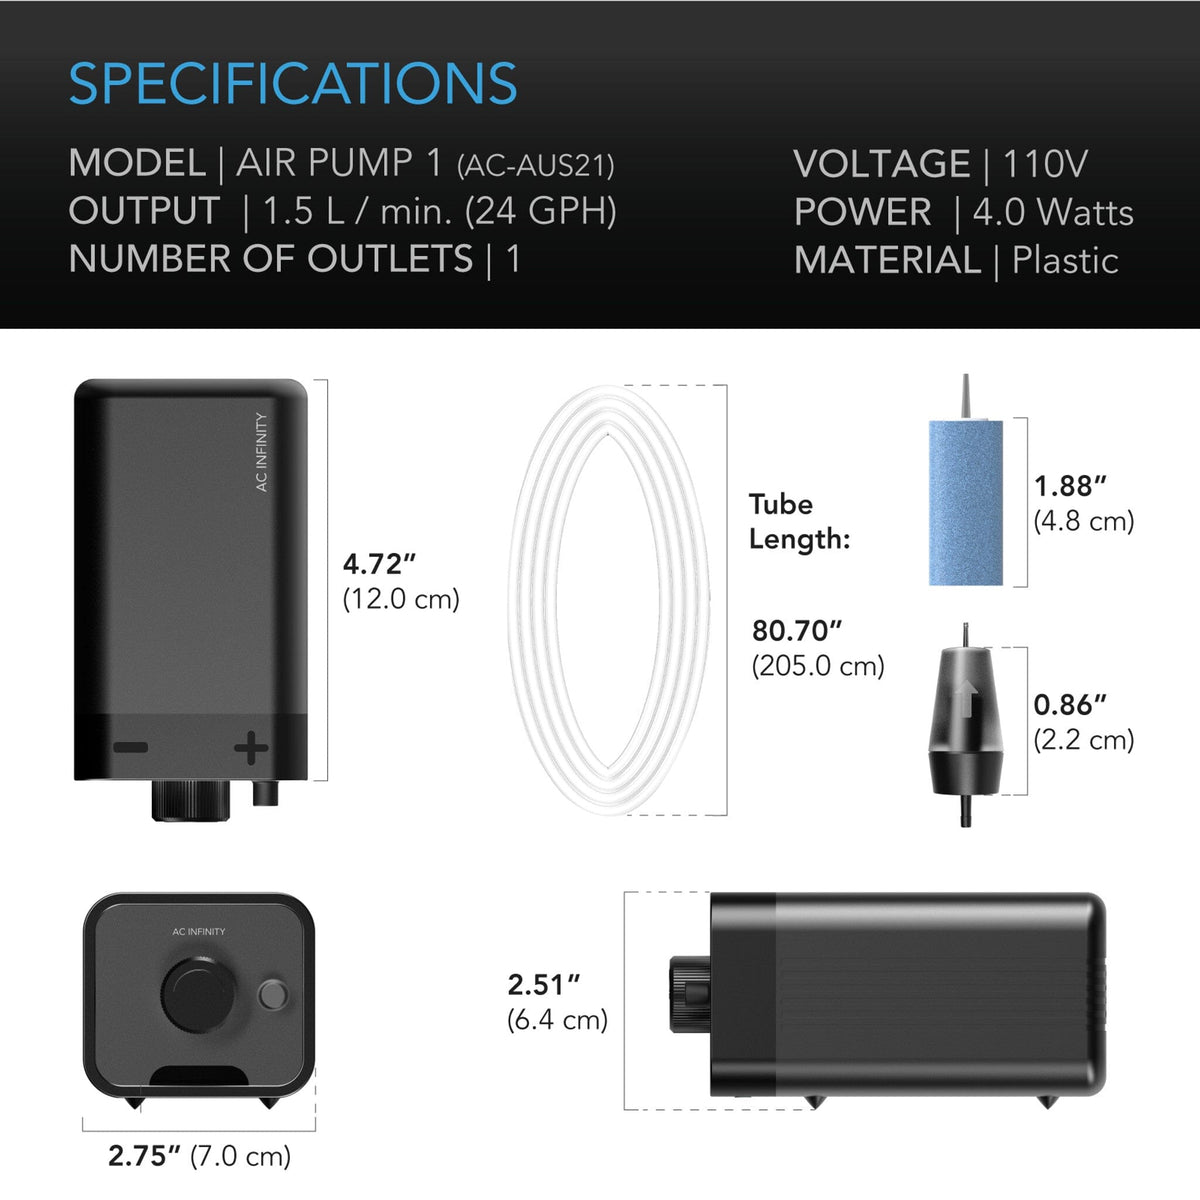 Air Pump 1 Specifications